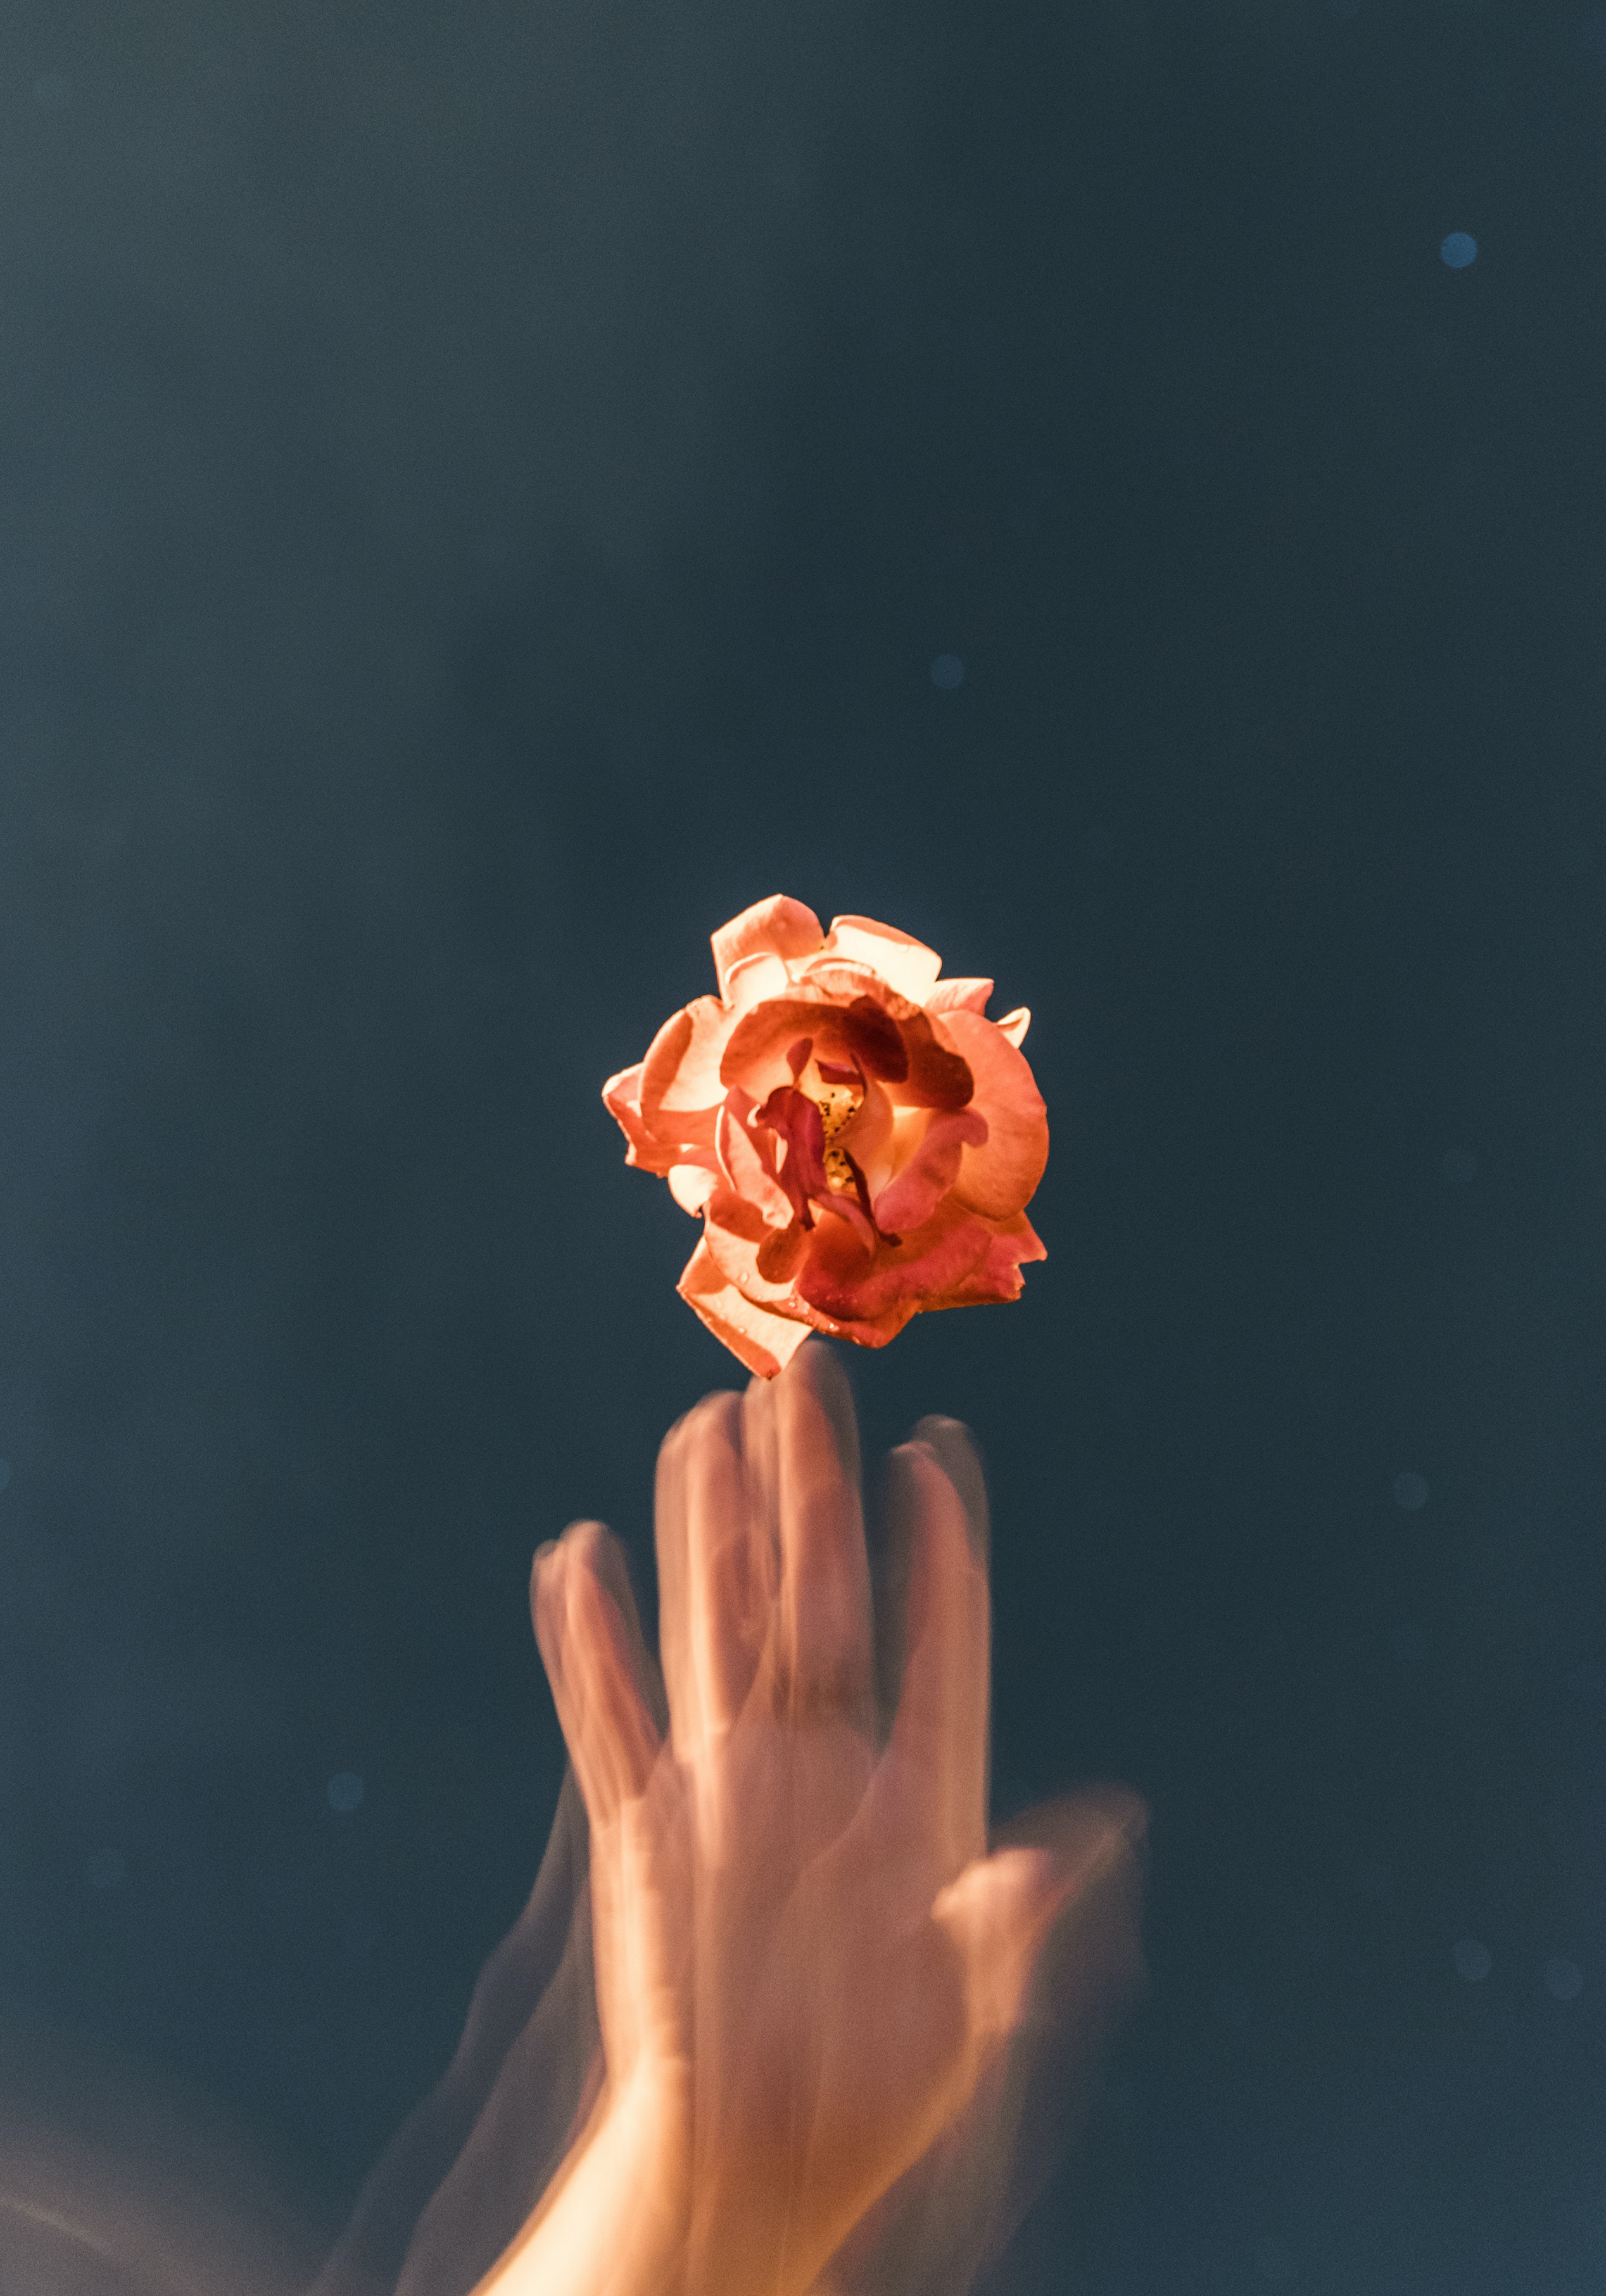 Link to the gloriosa project page. Depicts a hand reaching out towards an orange-petaled flower.